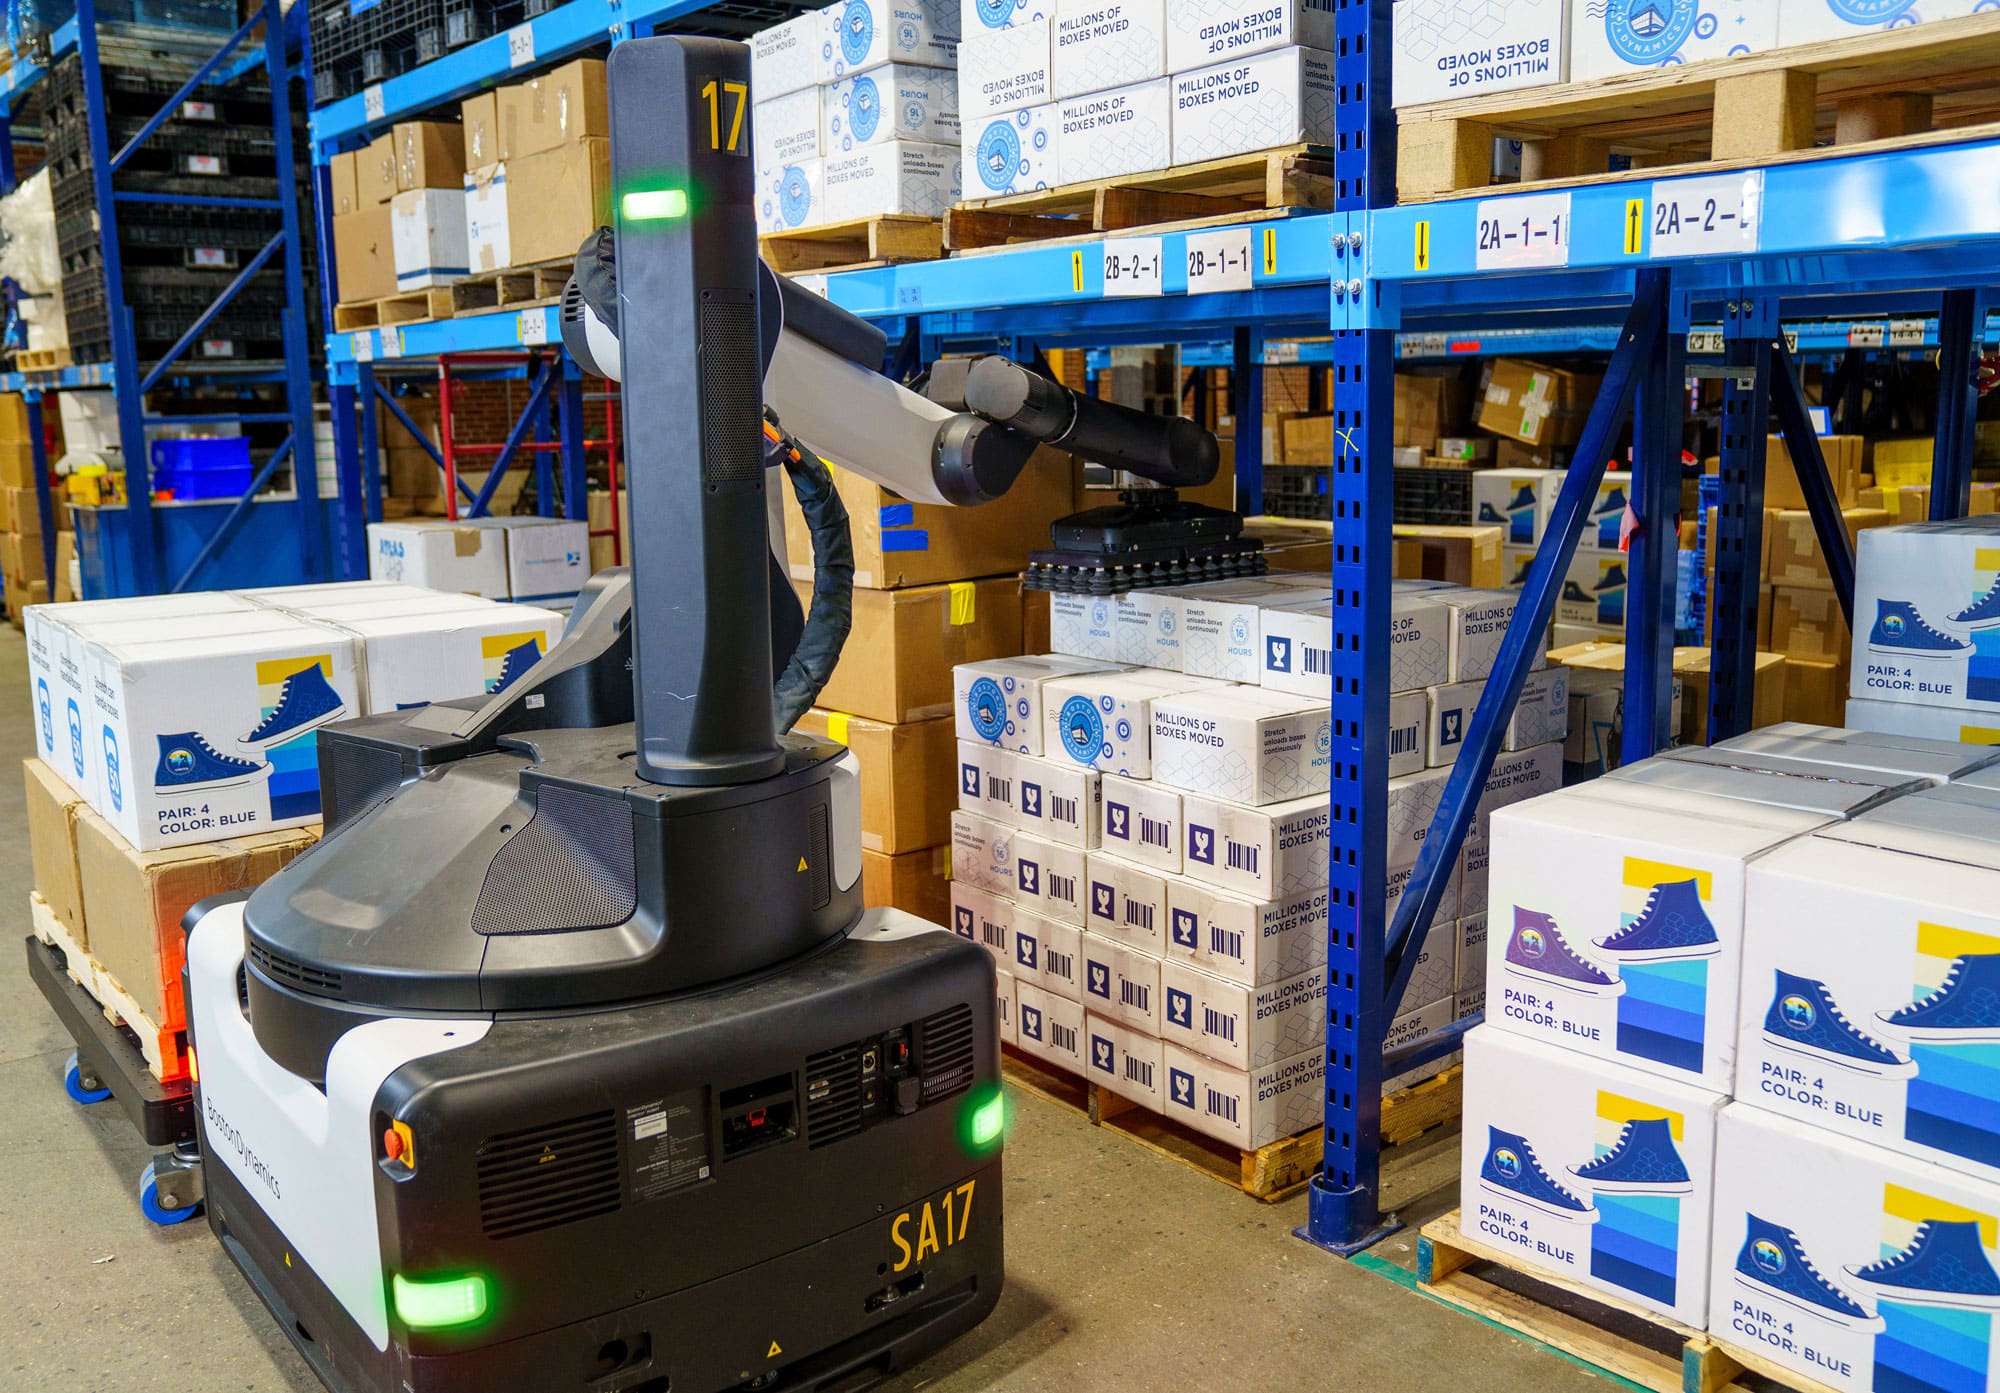 A robot with an arm and gripper grasps a box under racking in a warehouse.